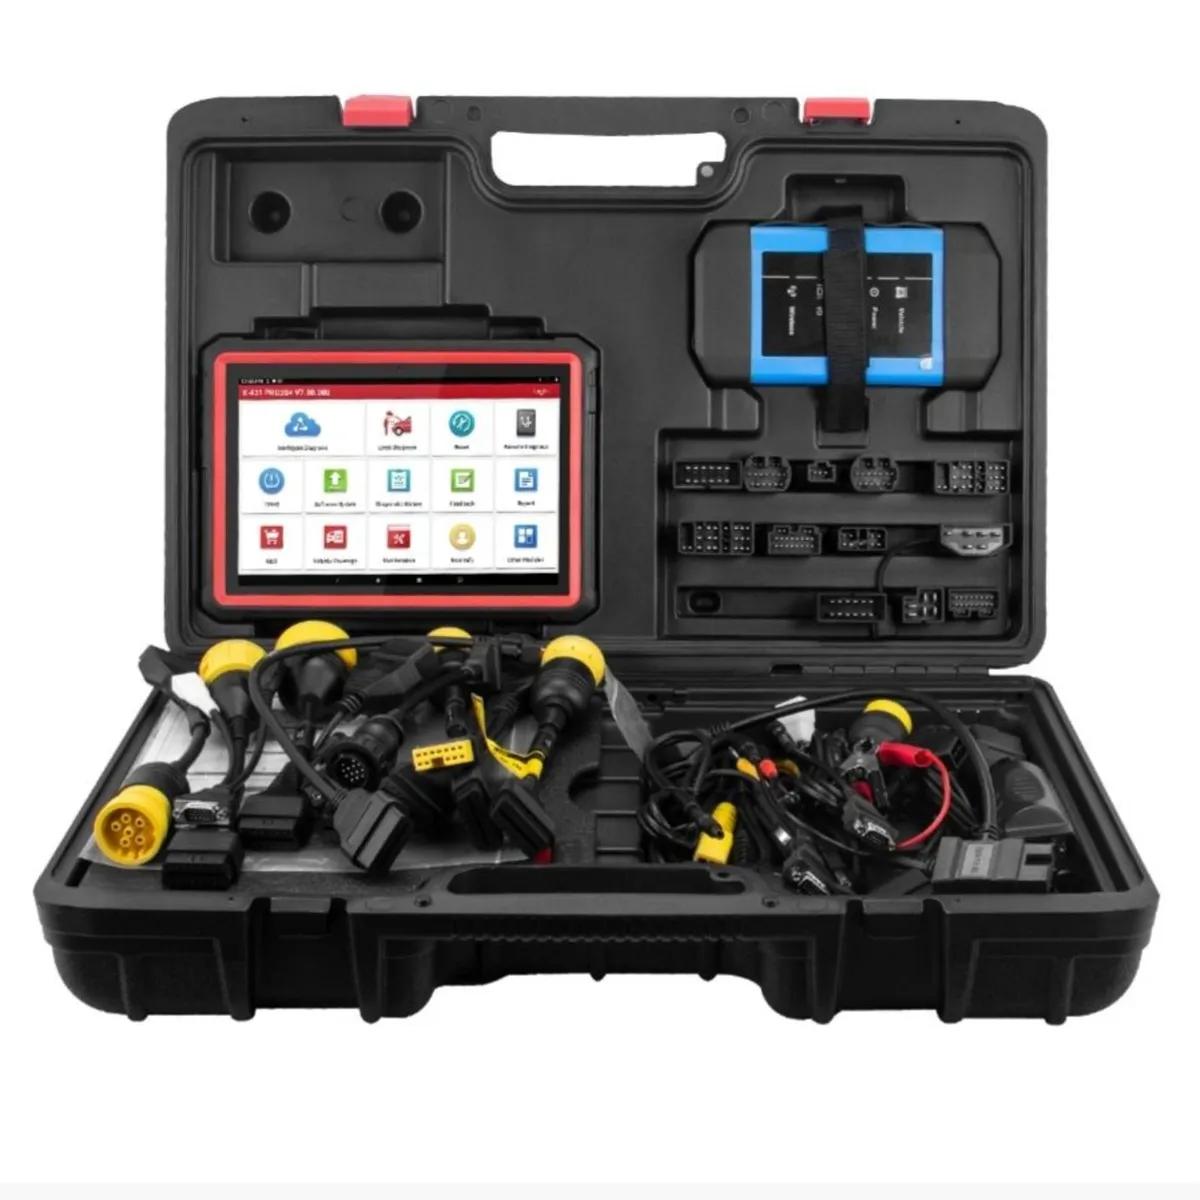 ⚡LAUNCH Ultimate HD & All diagnostic tools⚡